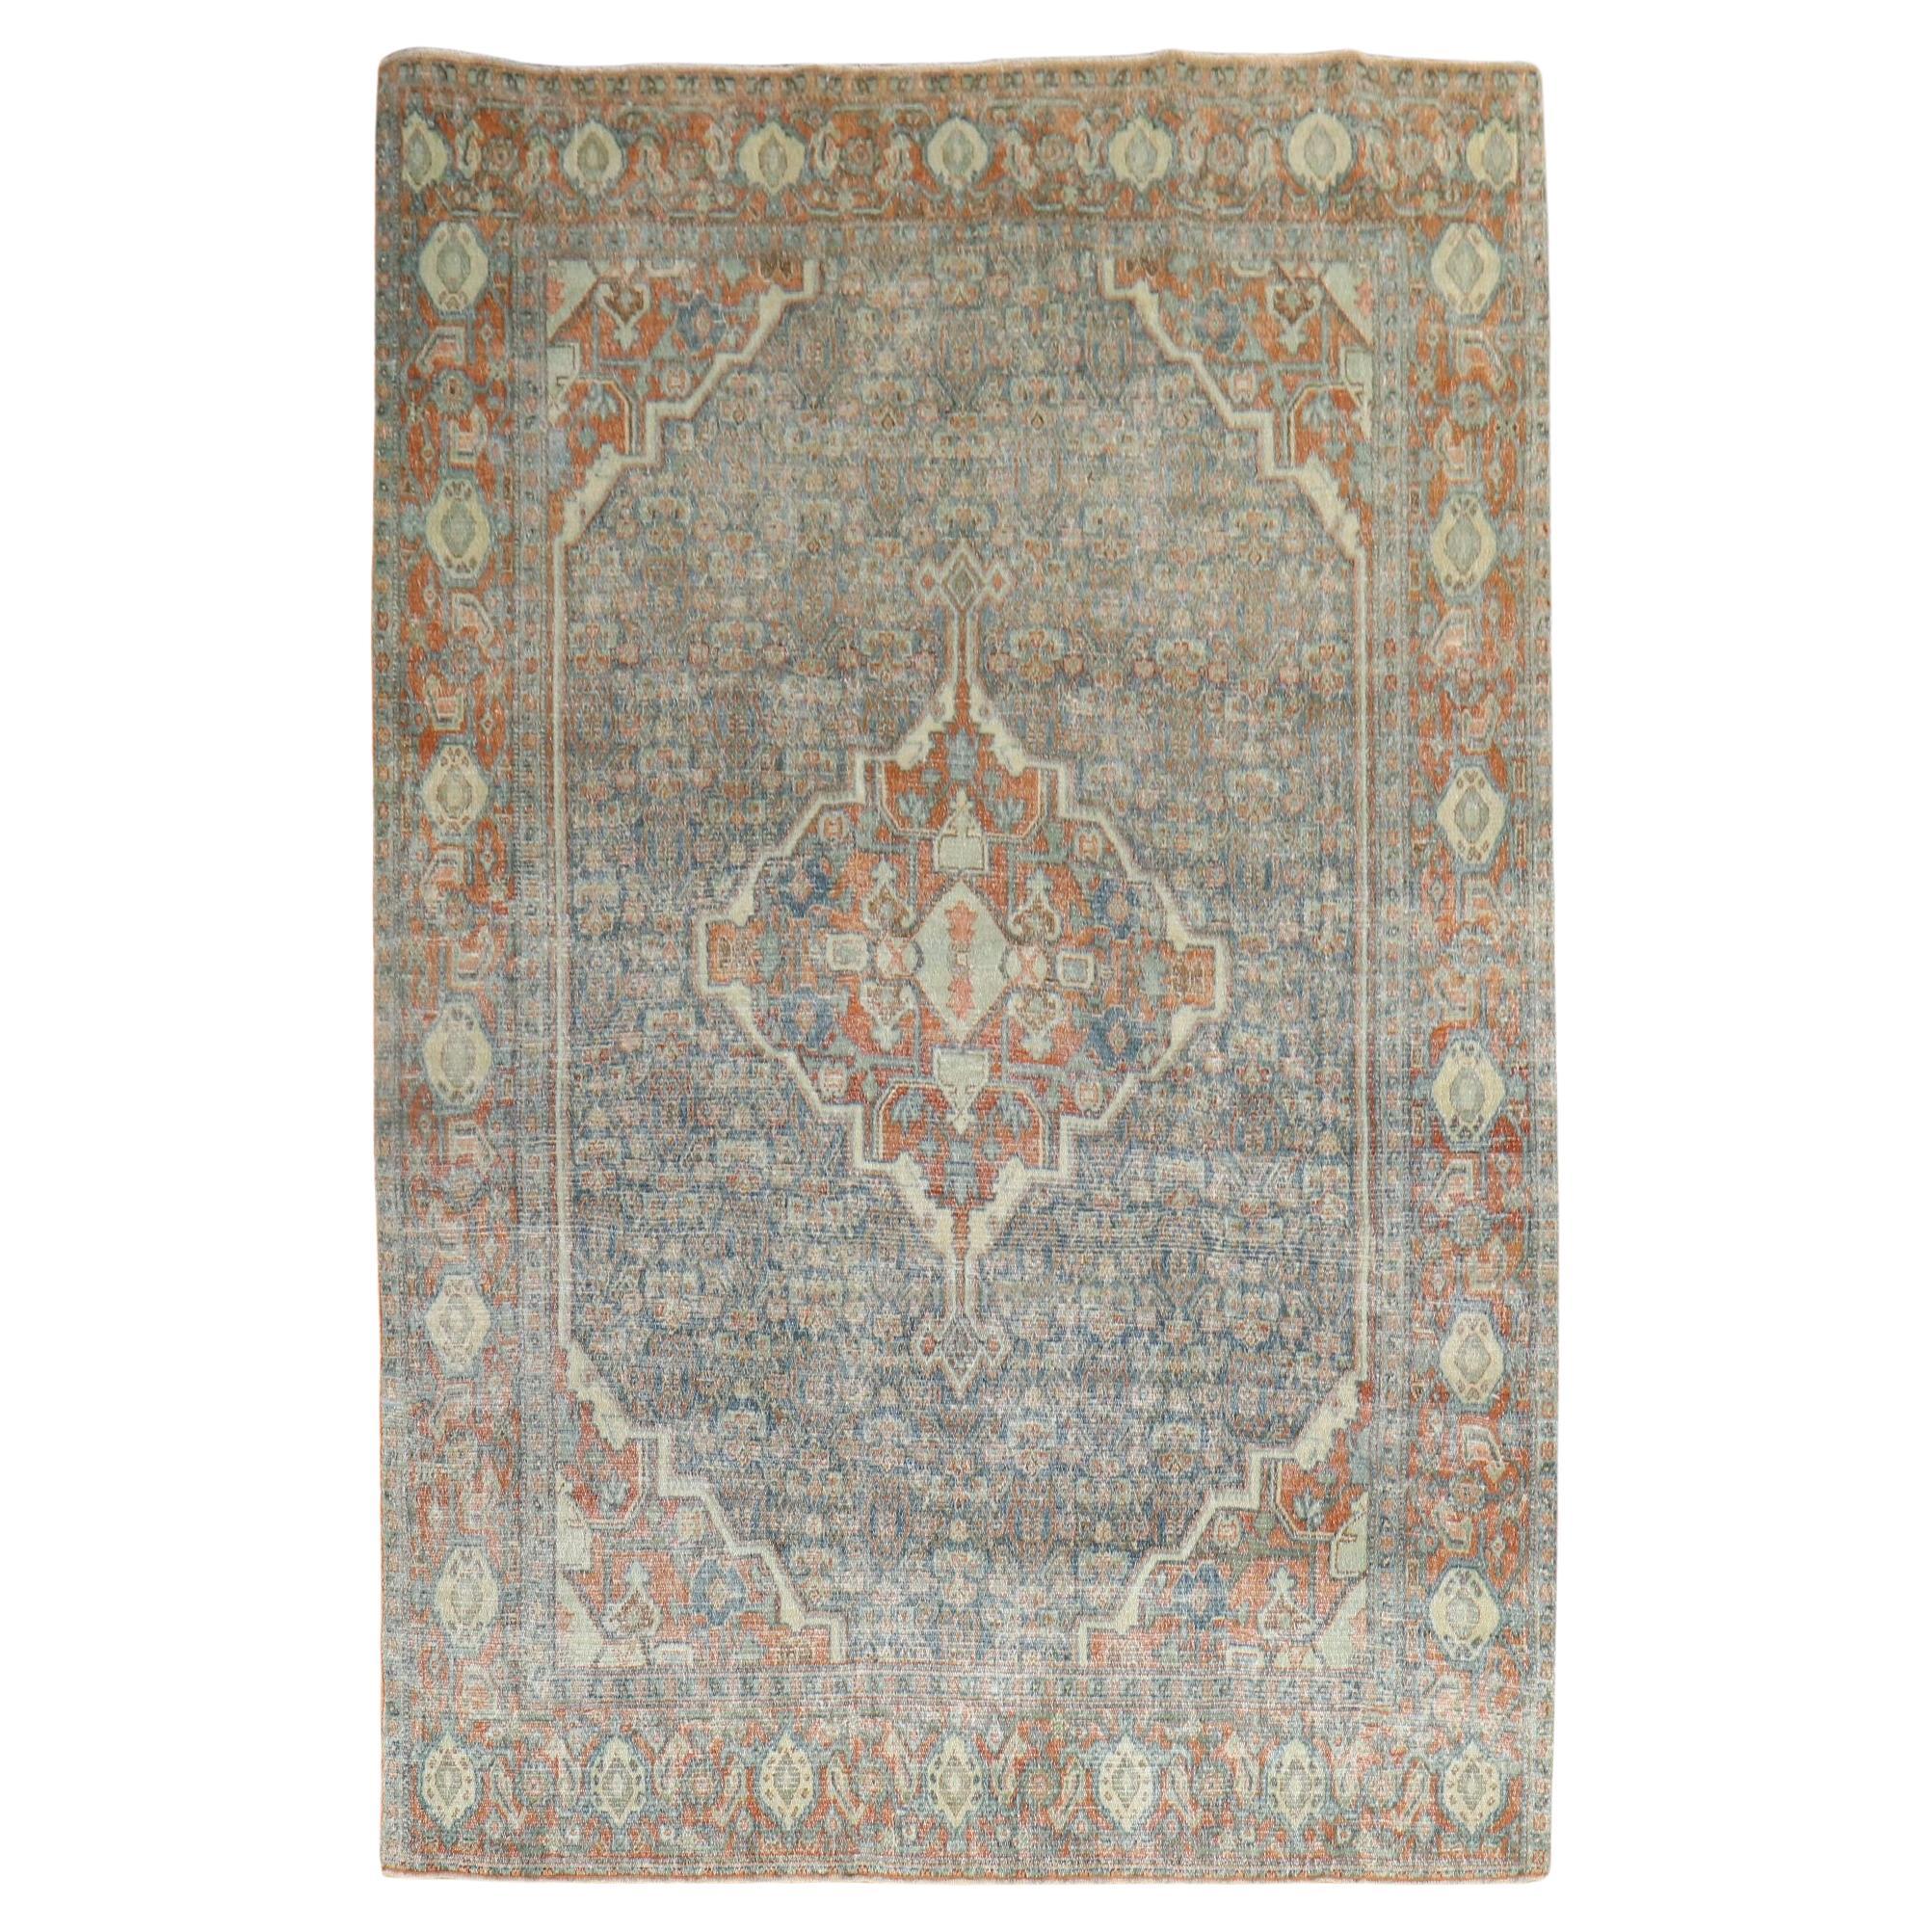 Zabihi Collection Antique Persian Senneh Worn Accent Size Rug